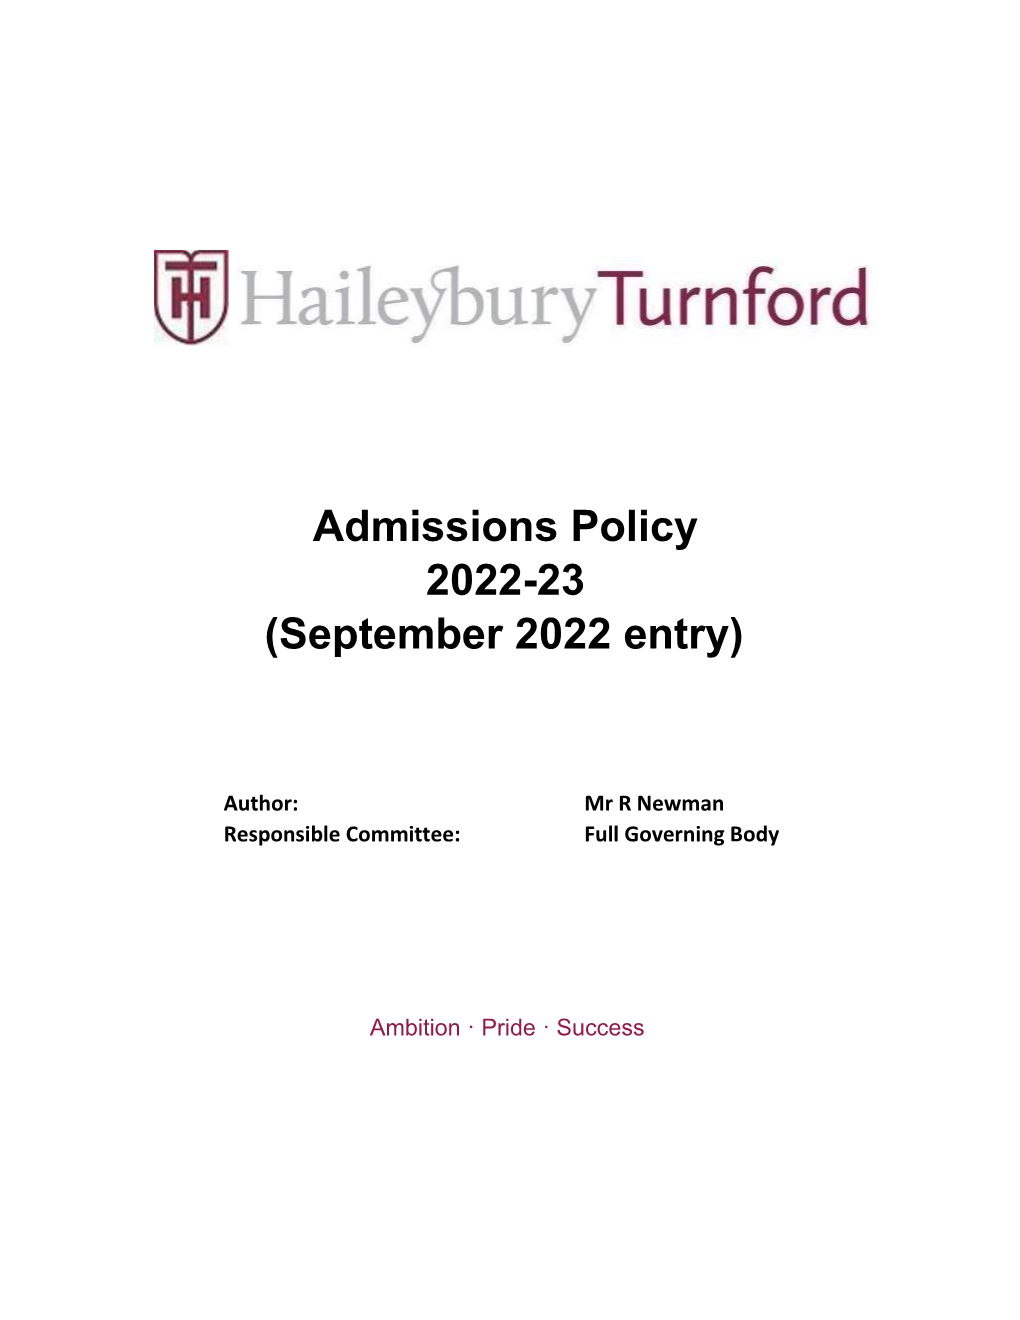 Admissions Policy 2022-23